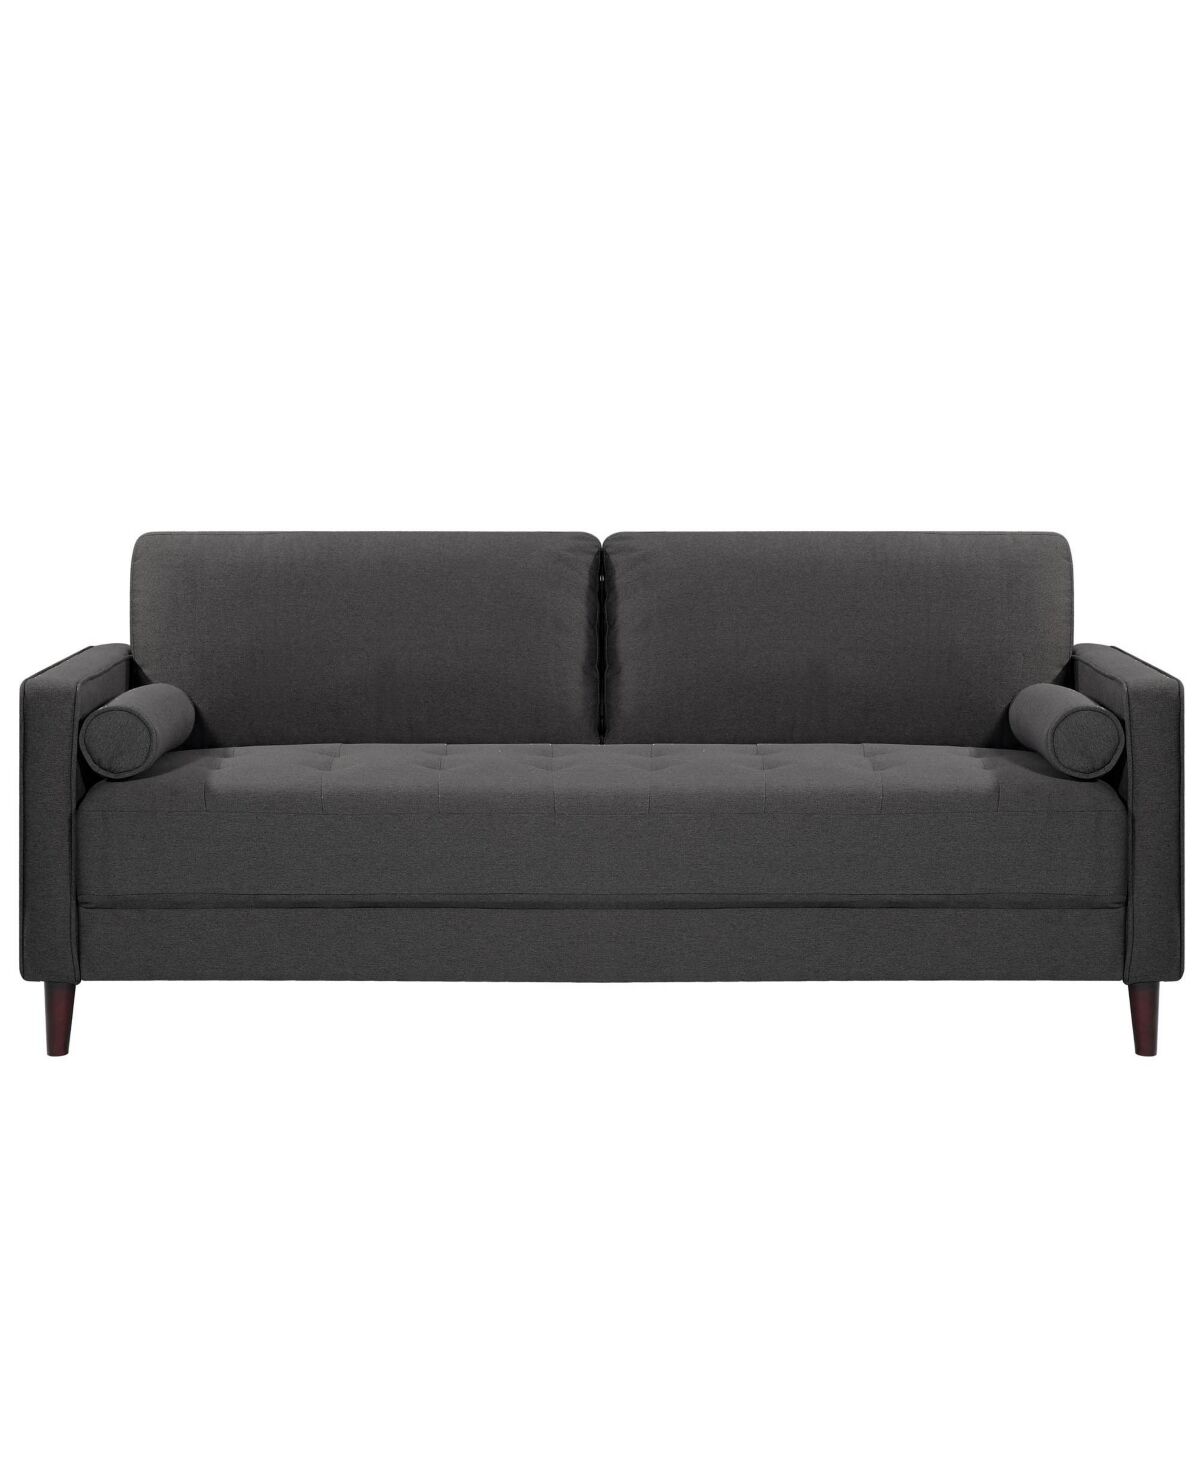 Lifestyle Solutions Lillith Sofa - Heather Gray